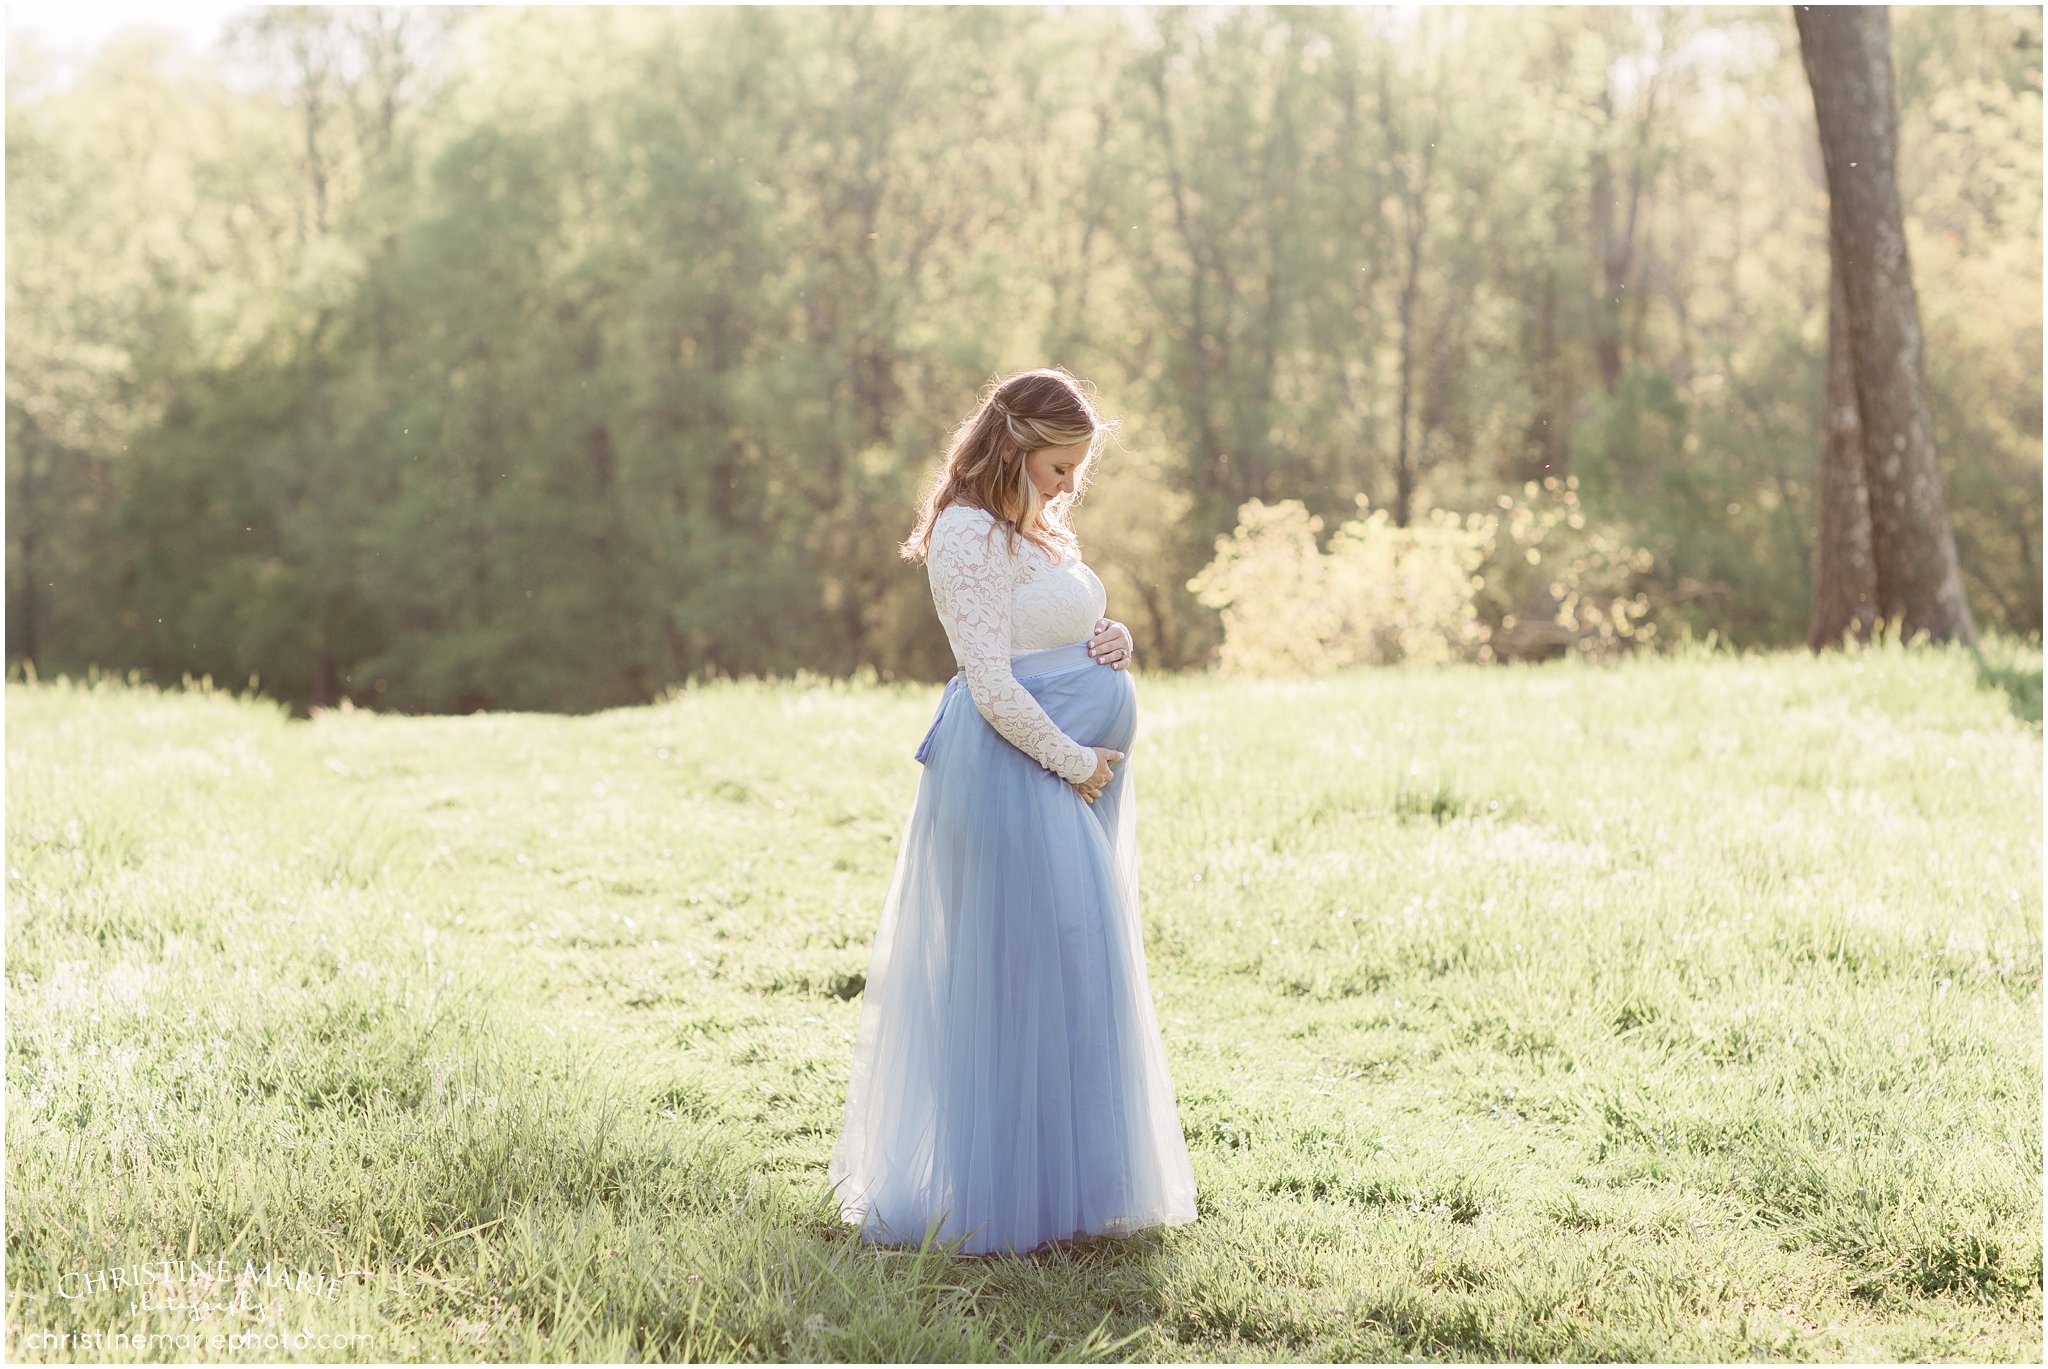 Cumming Maternity Photographer | Maternity photos in the country 